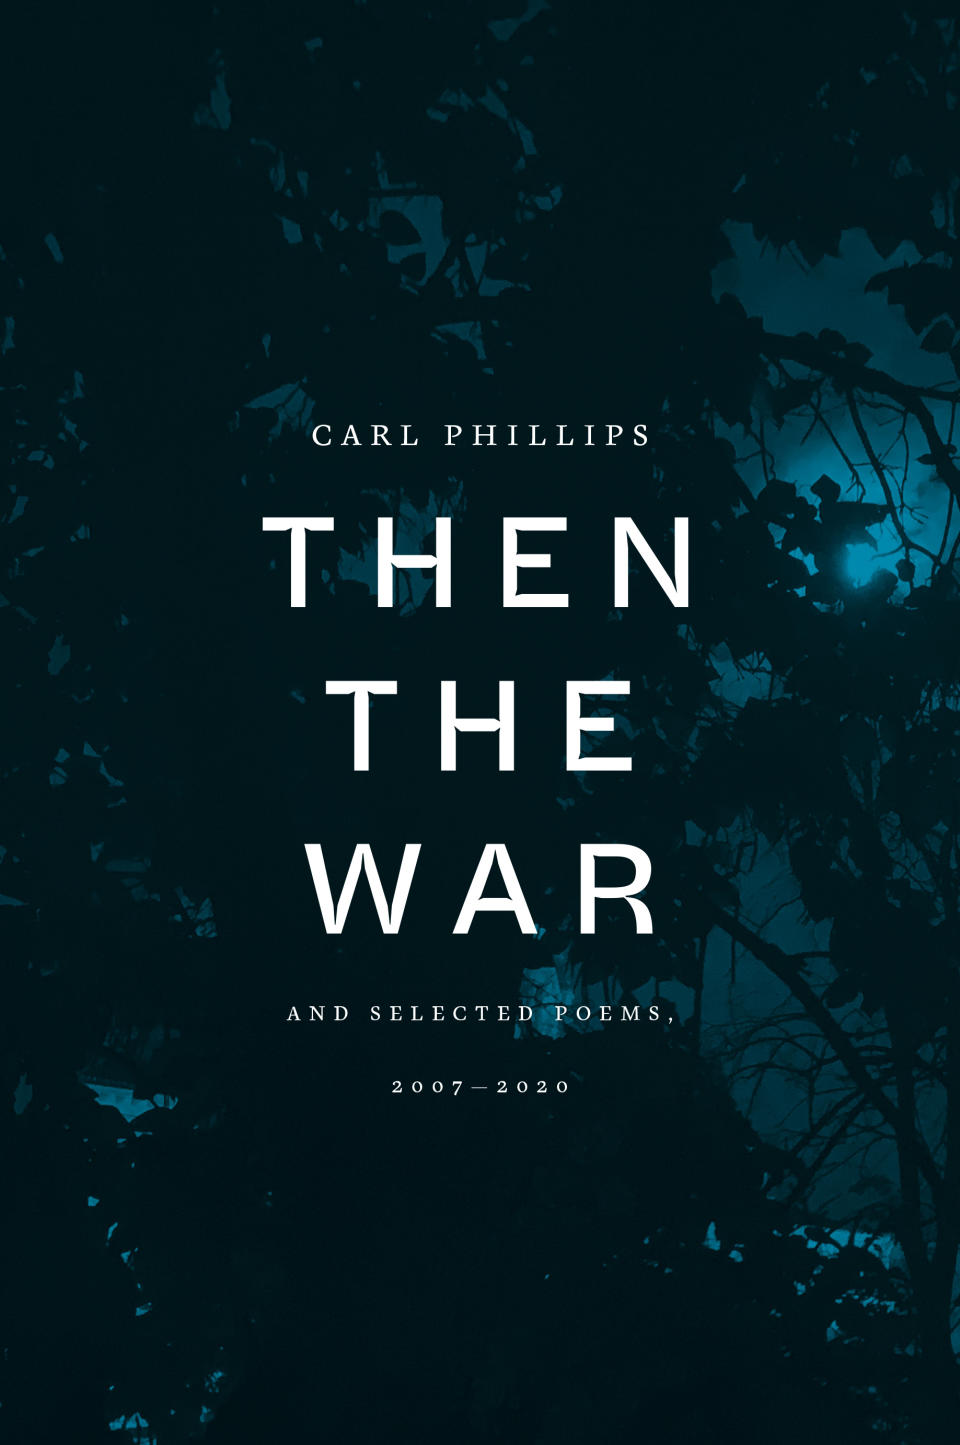 This image released by FSG shows "Then the War: And Selected Poems, 2007-2020,” by Carl Phillips, winner of the Pulitzer Prize for poetry. (FSG via AP)